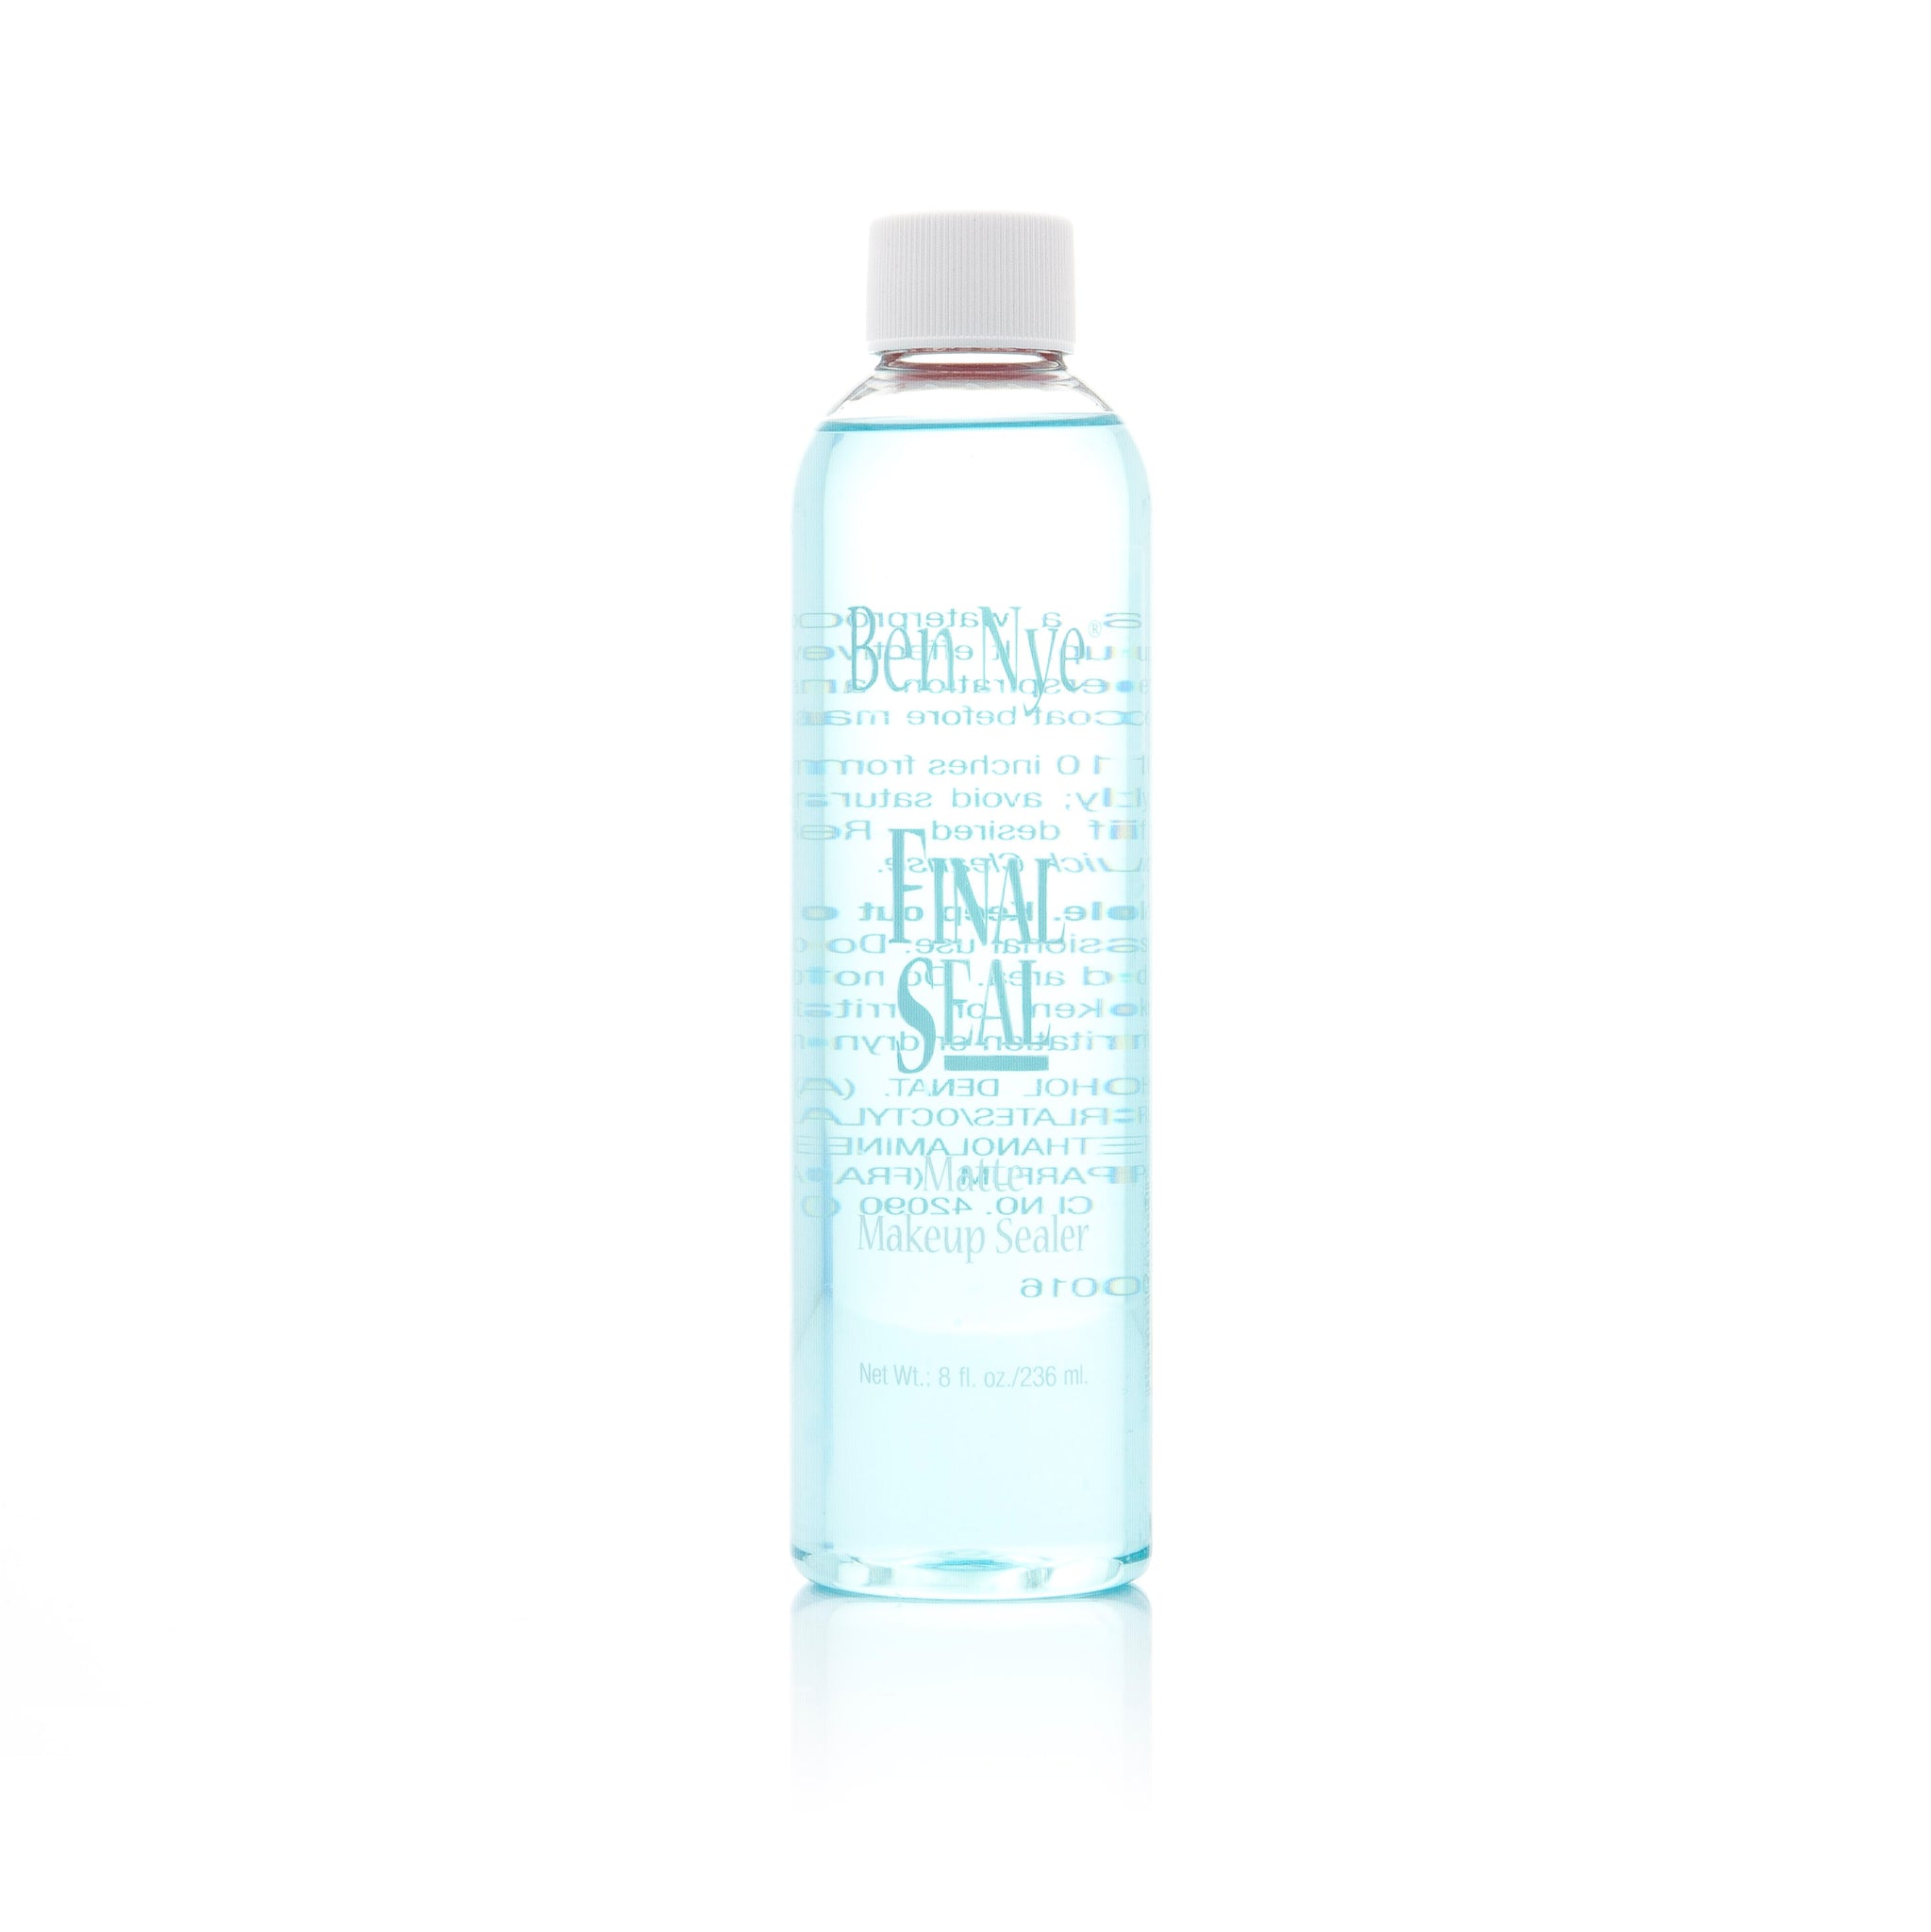 Ben Nye Final Seal 8oz Refill - The Compleat Sculptor